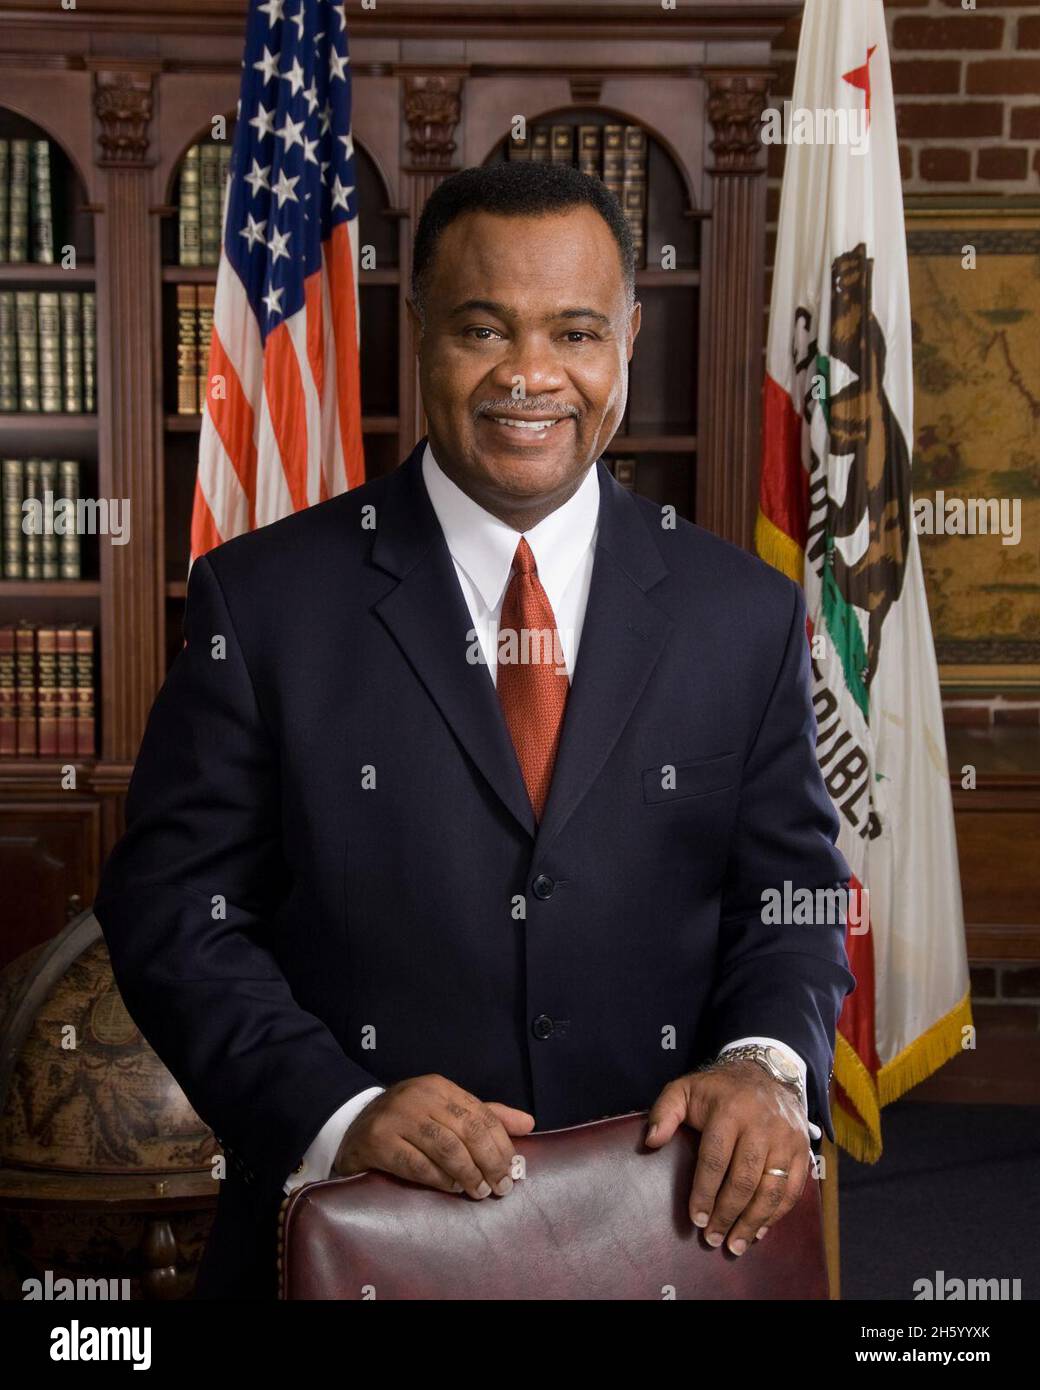 Official CA State Board of Equalization Portrait of Jerome Horton. ca. Taken on 8 December 2009 Stock Photo